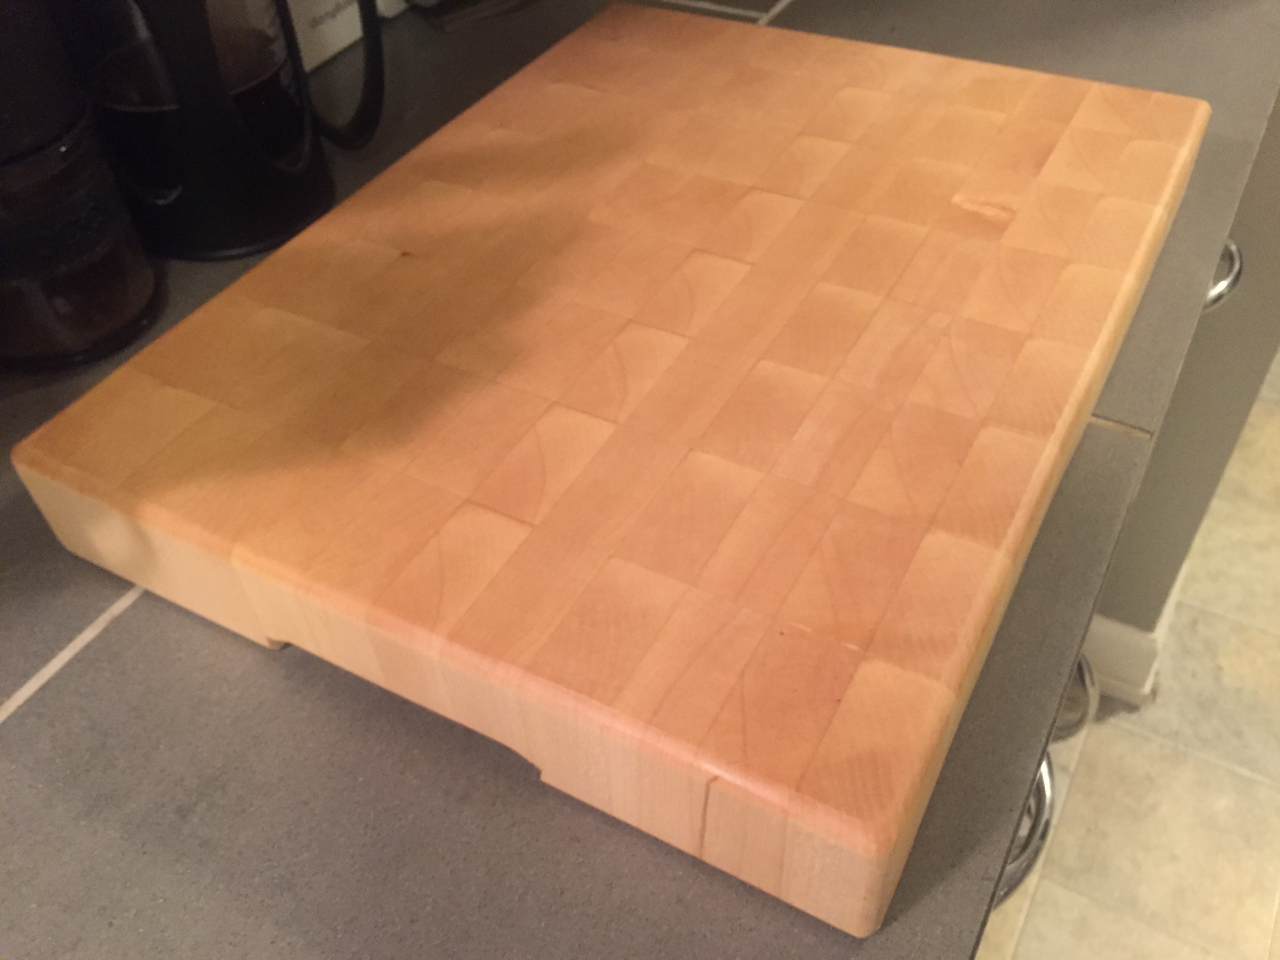 Cutting Board Build - Finished #2